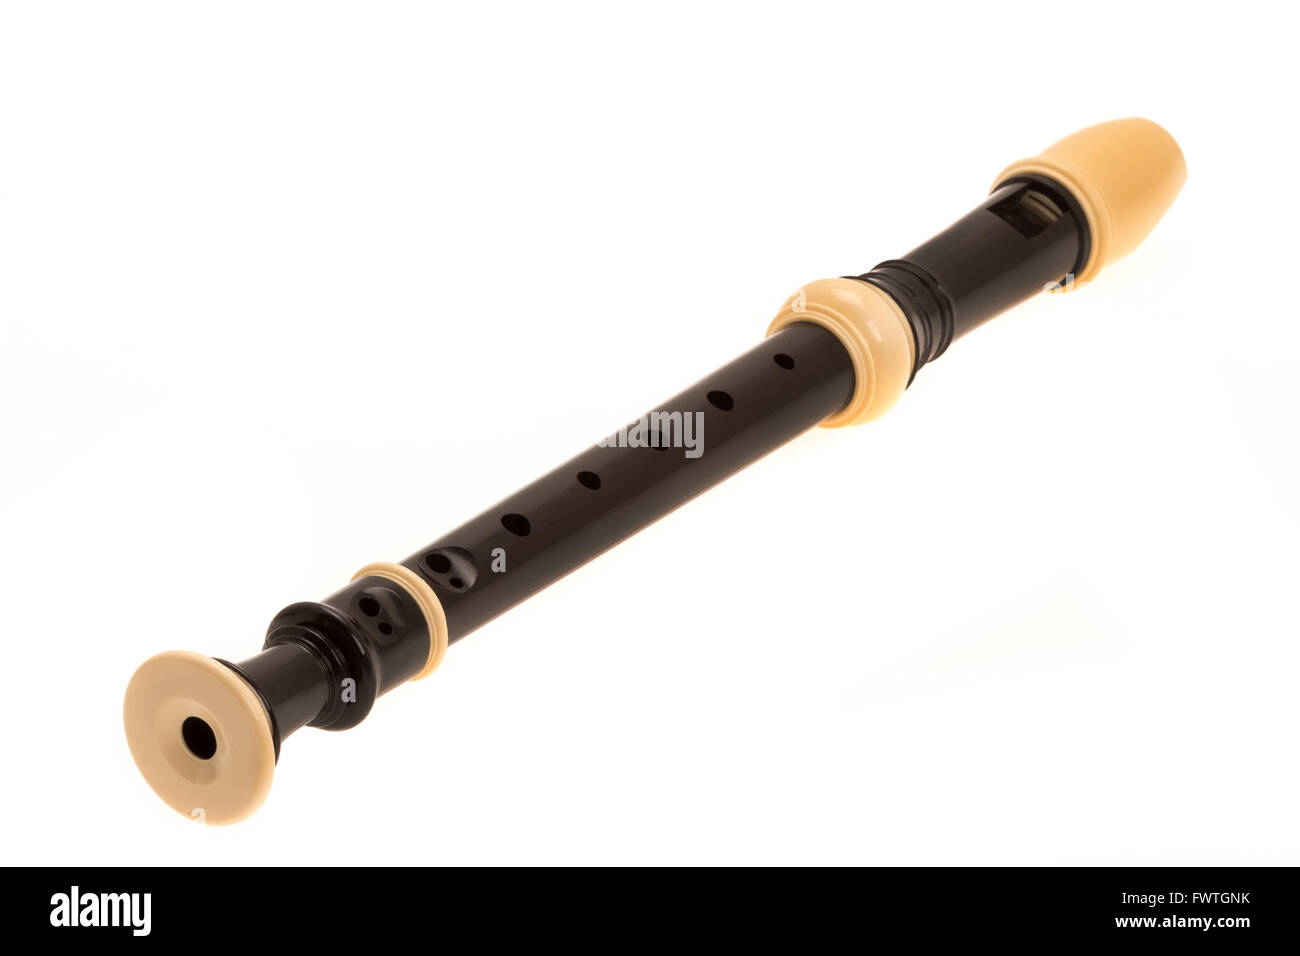 A recorder instrument - studio shot with a white background Stock Photo